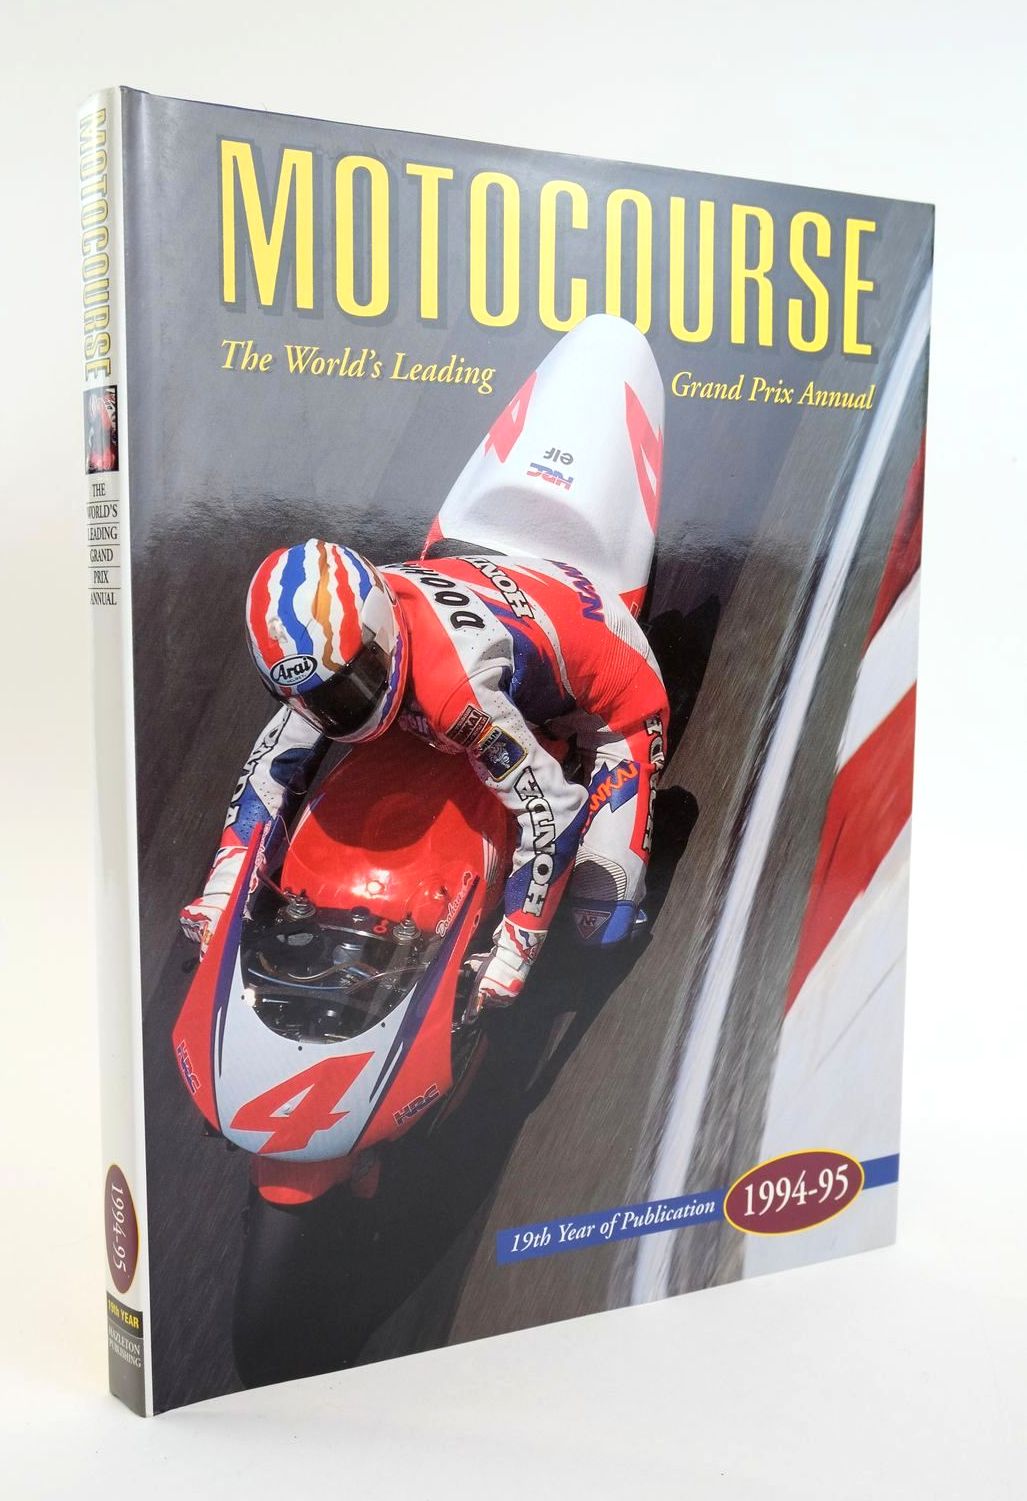 Photo of MOTOCOURSE 1994-95 published by Hazleton Publishing (STOCK CODE: 1319243)  for sale by Stella & Rose's Books